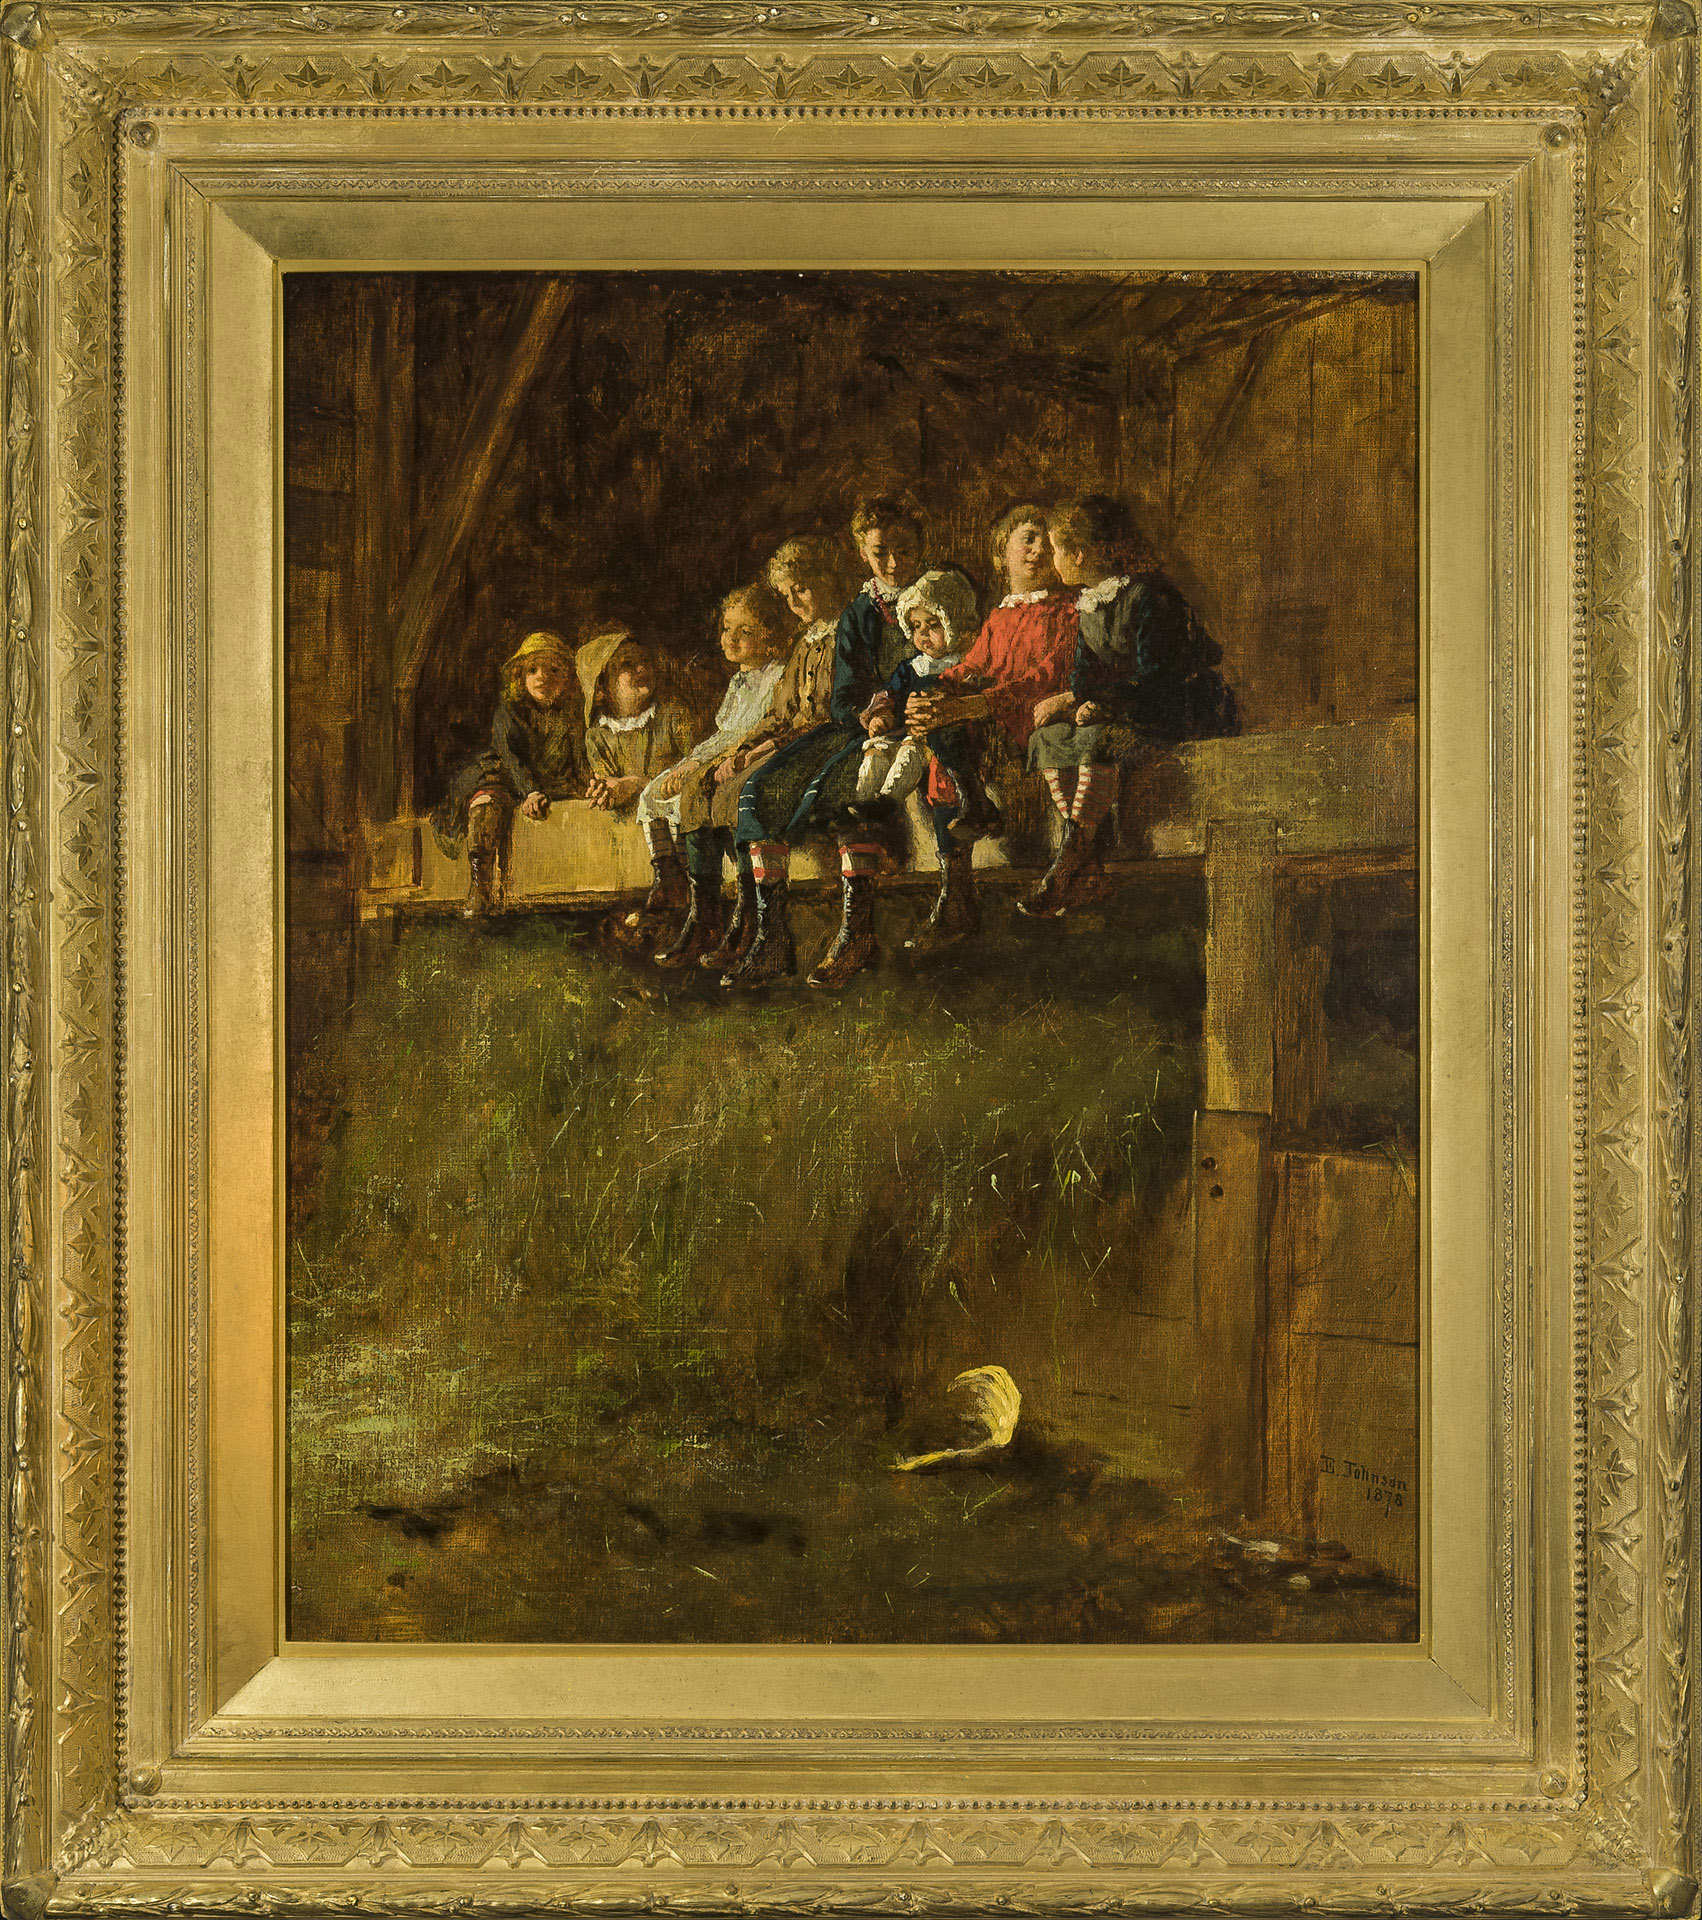 a painting of 7 children dressed in 19th century clothing sitting on a rafter in a barn